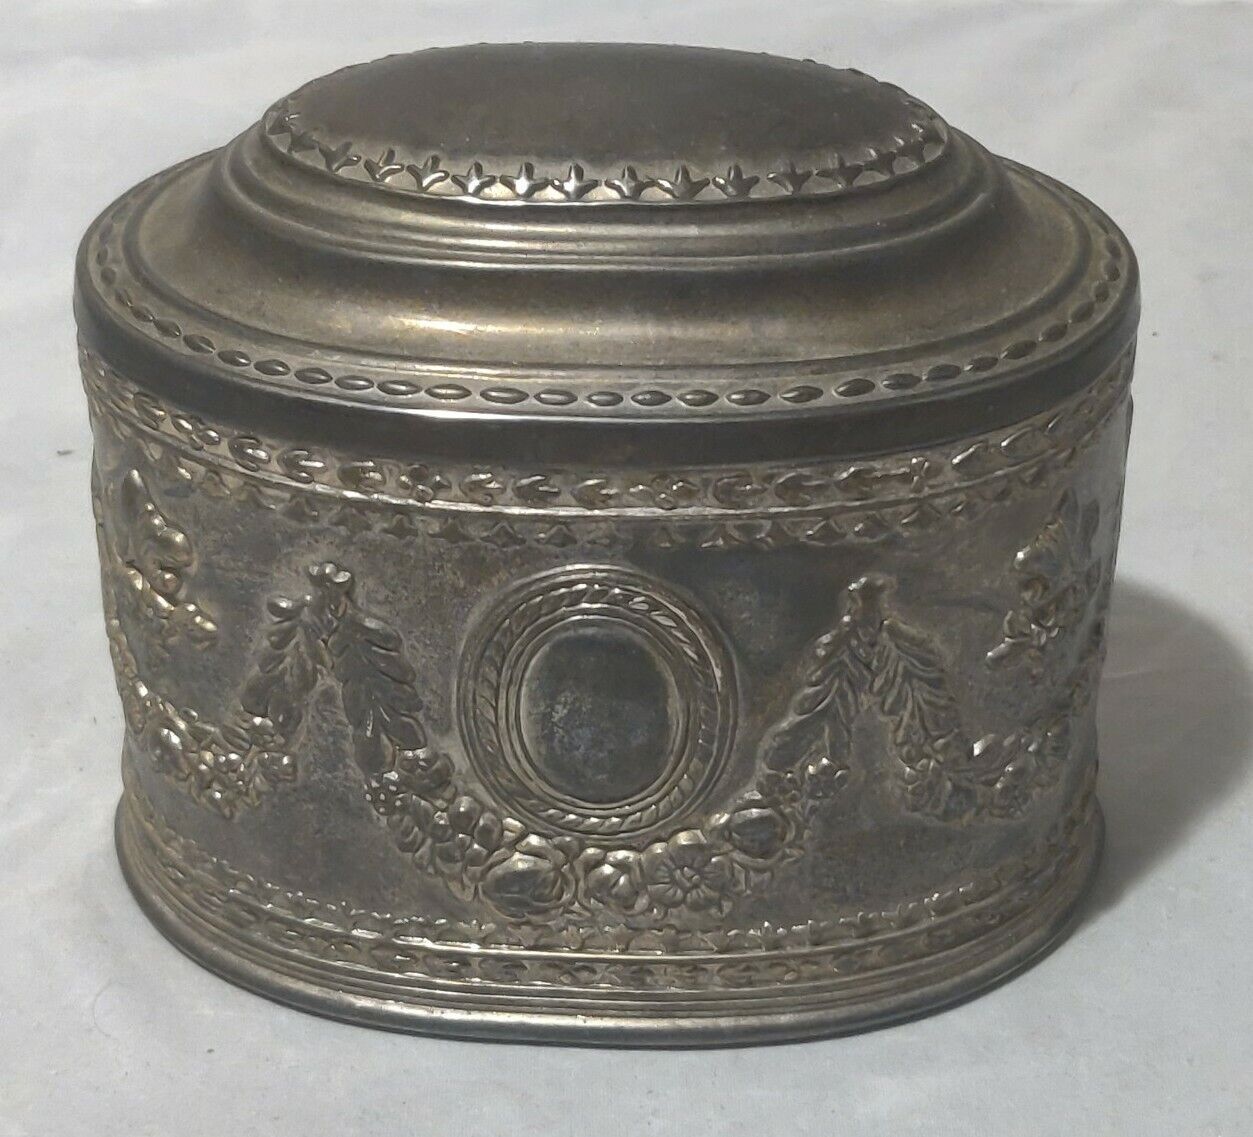 Antique Silver Plated Lidded Oval Jewellery Box Persian Eastern